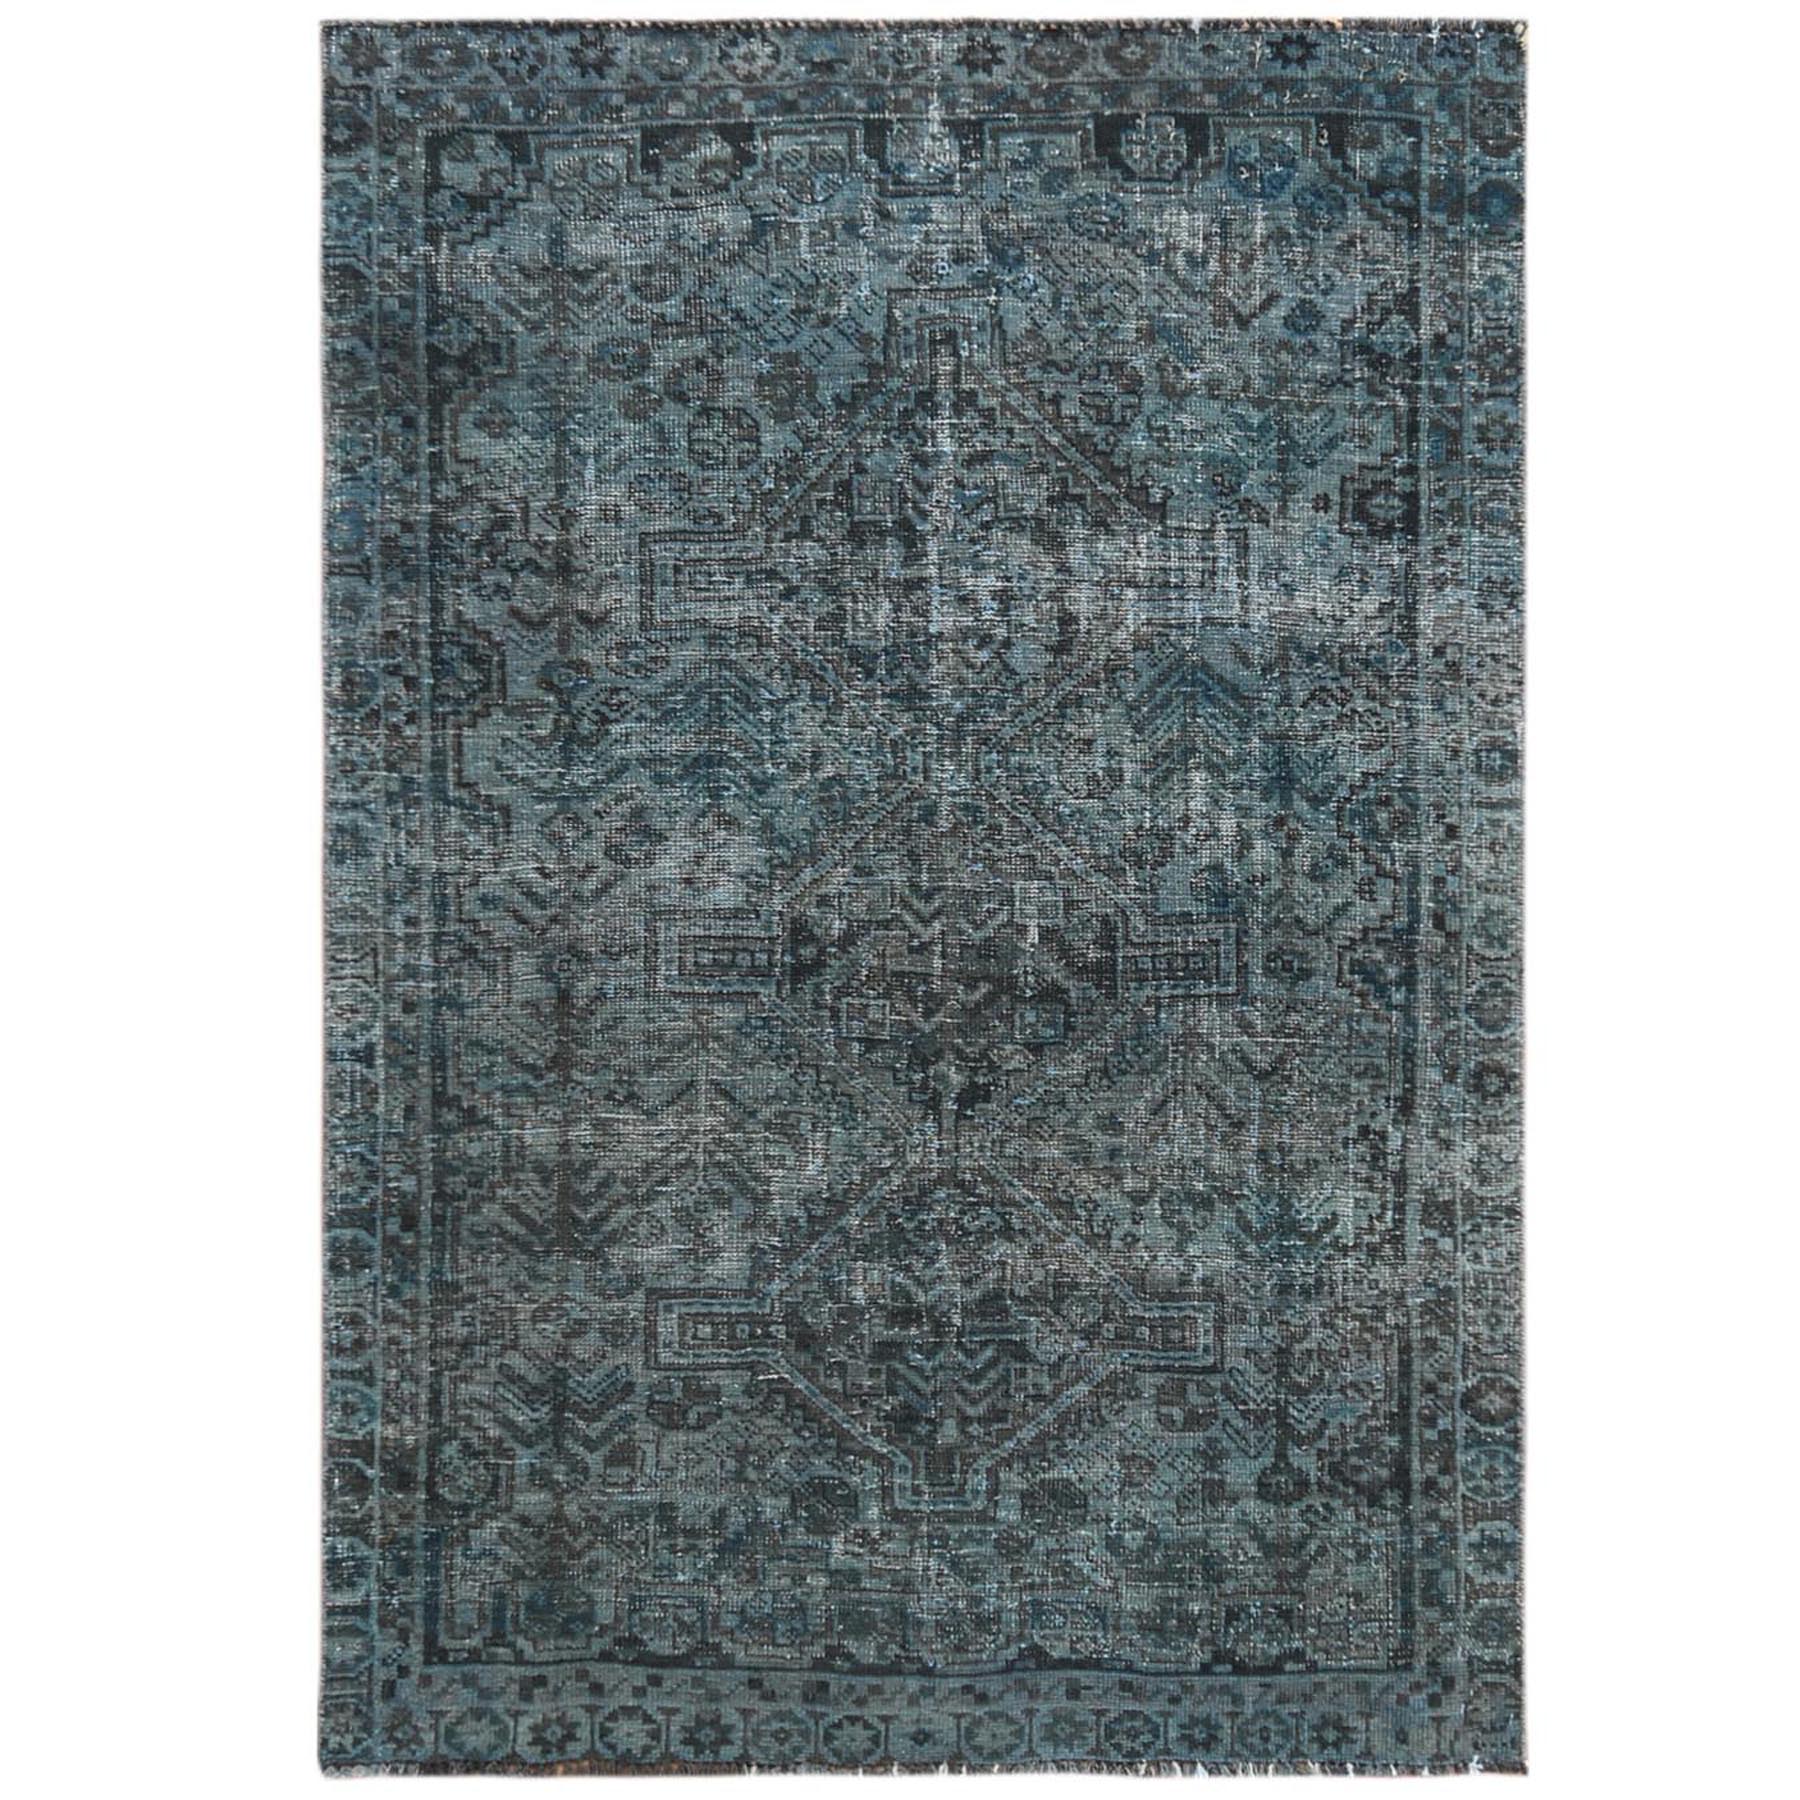 Fetneh Collection And Vintage Overdyed Collection Hand Knotted Teal Rug No: 1121108